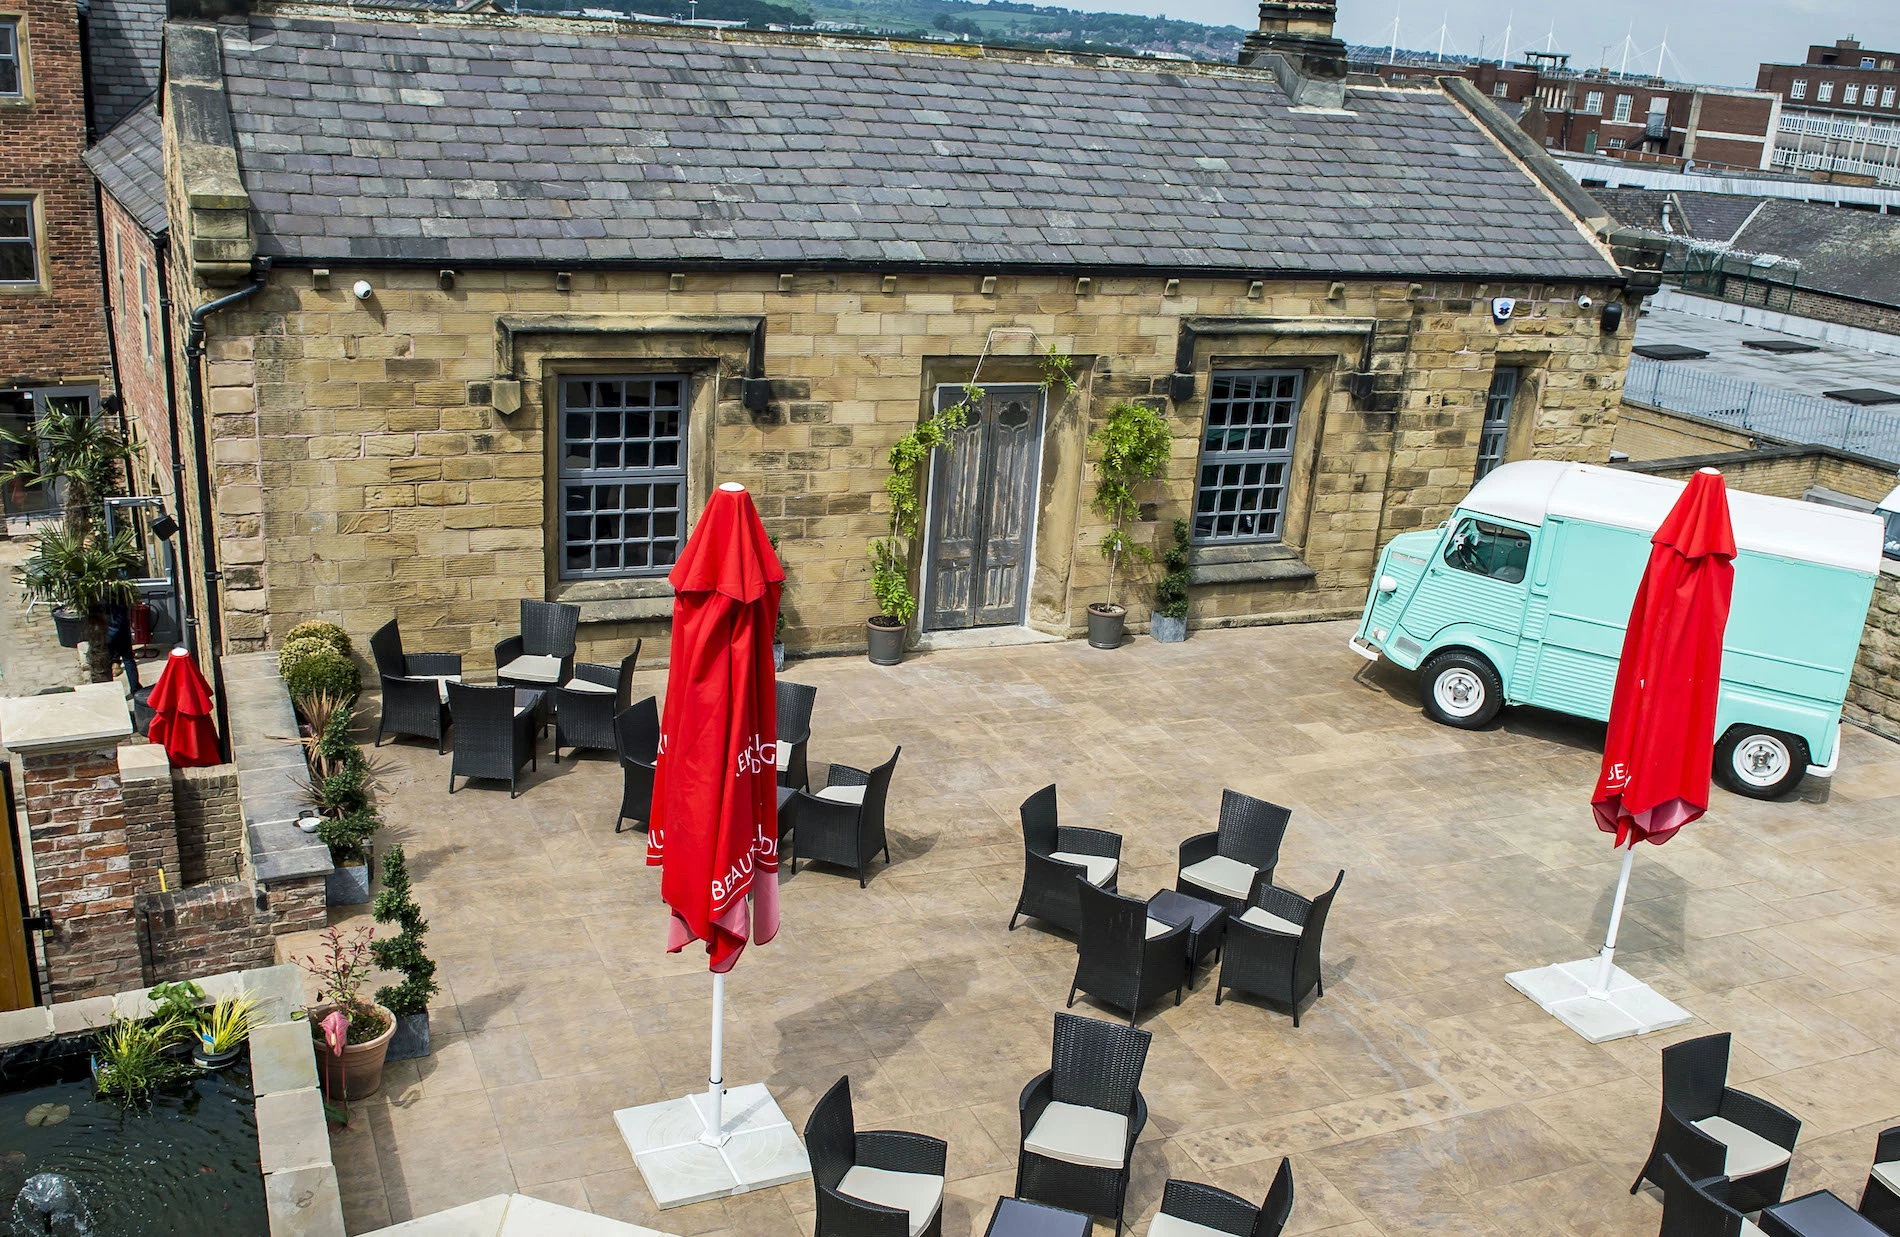 The George Wright boutique hotel, bar and restaurant which has just opened in Rotherham.